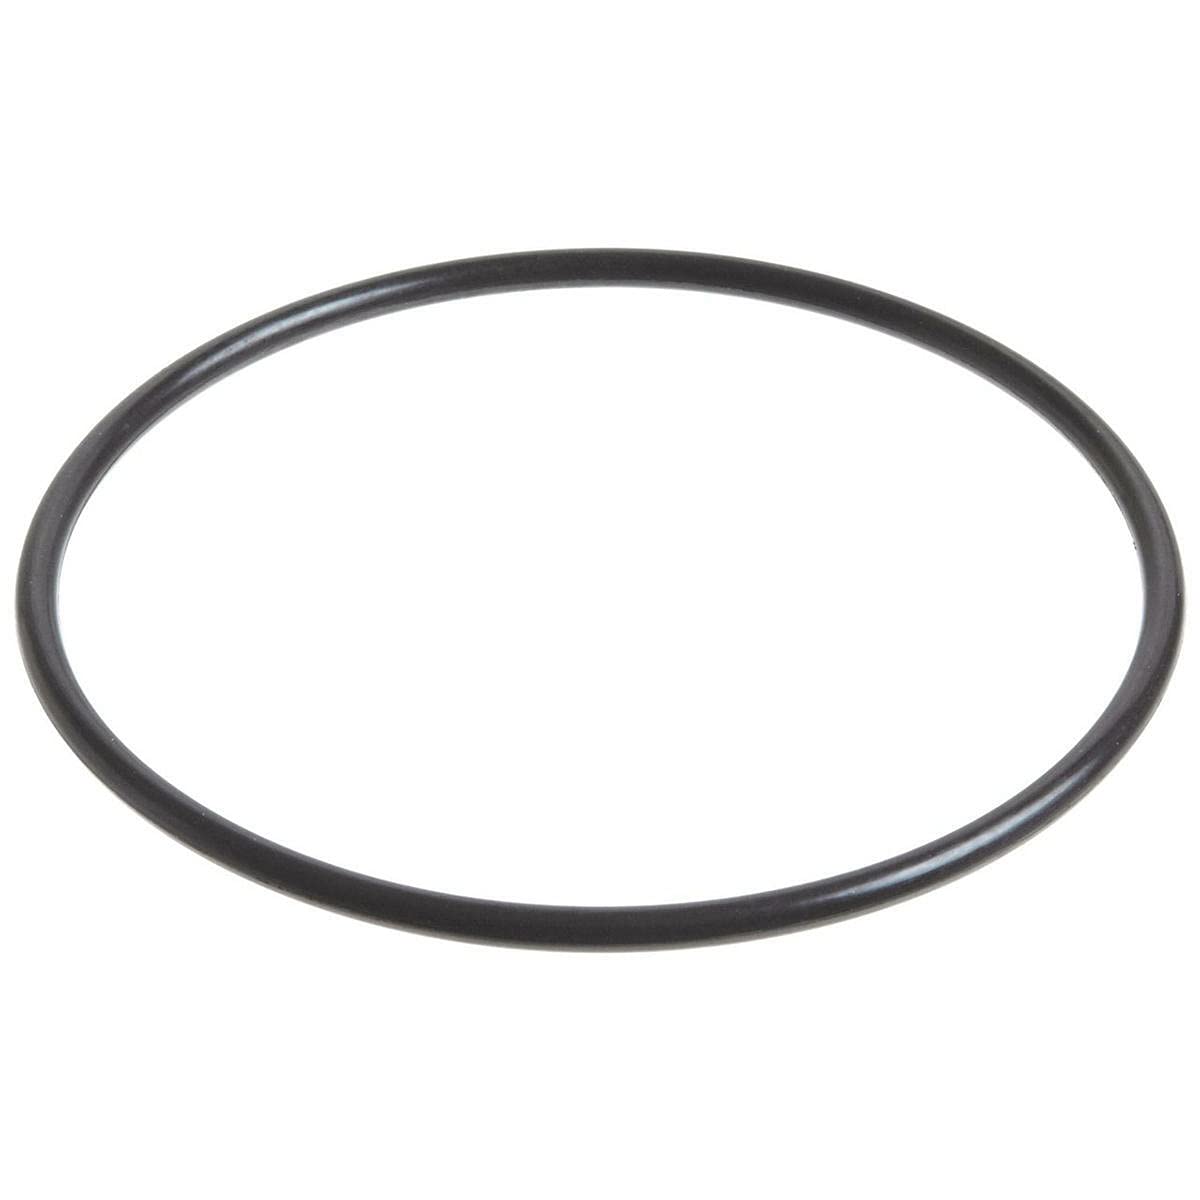 Replacement for Summer Waves P58030001K01 1-1/4" Hose Connection O-Ring